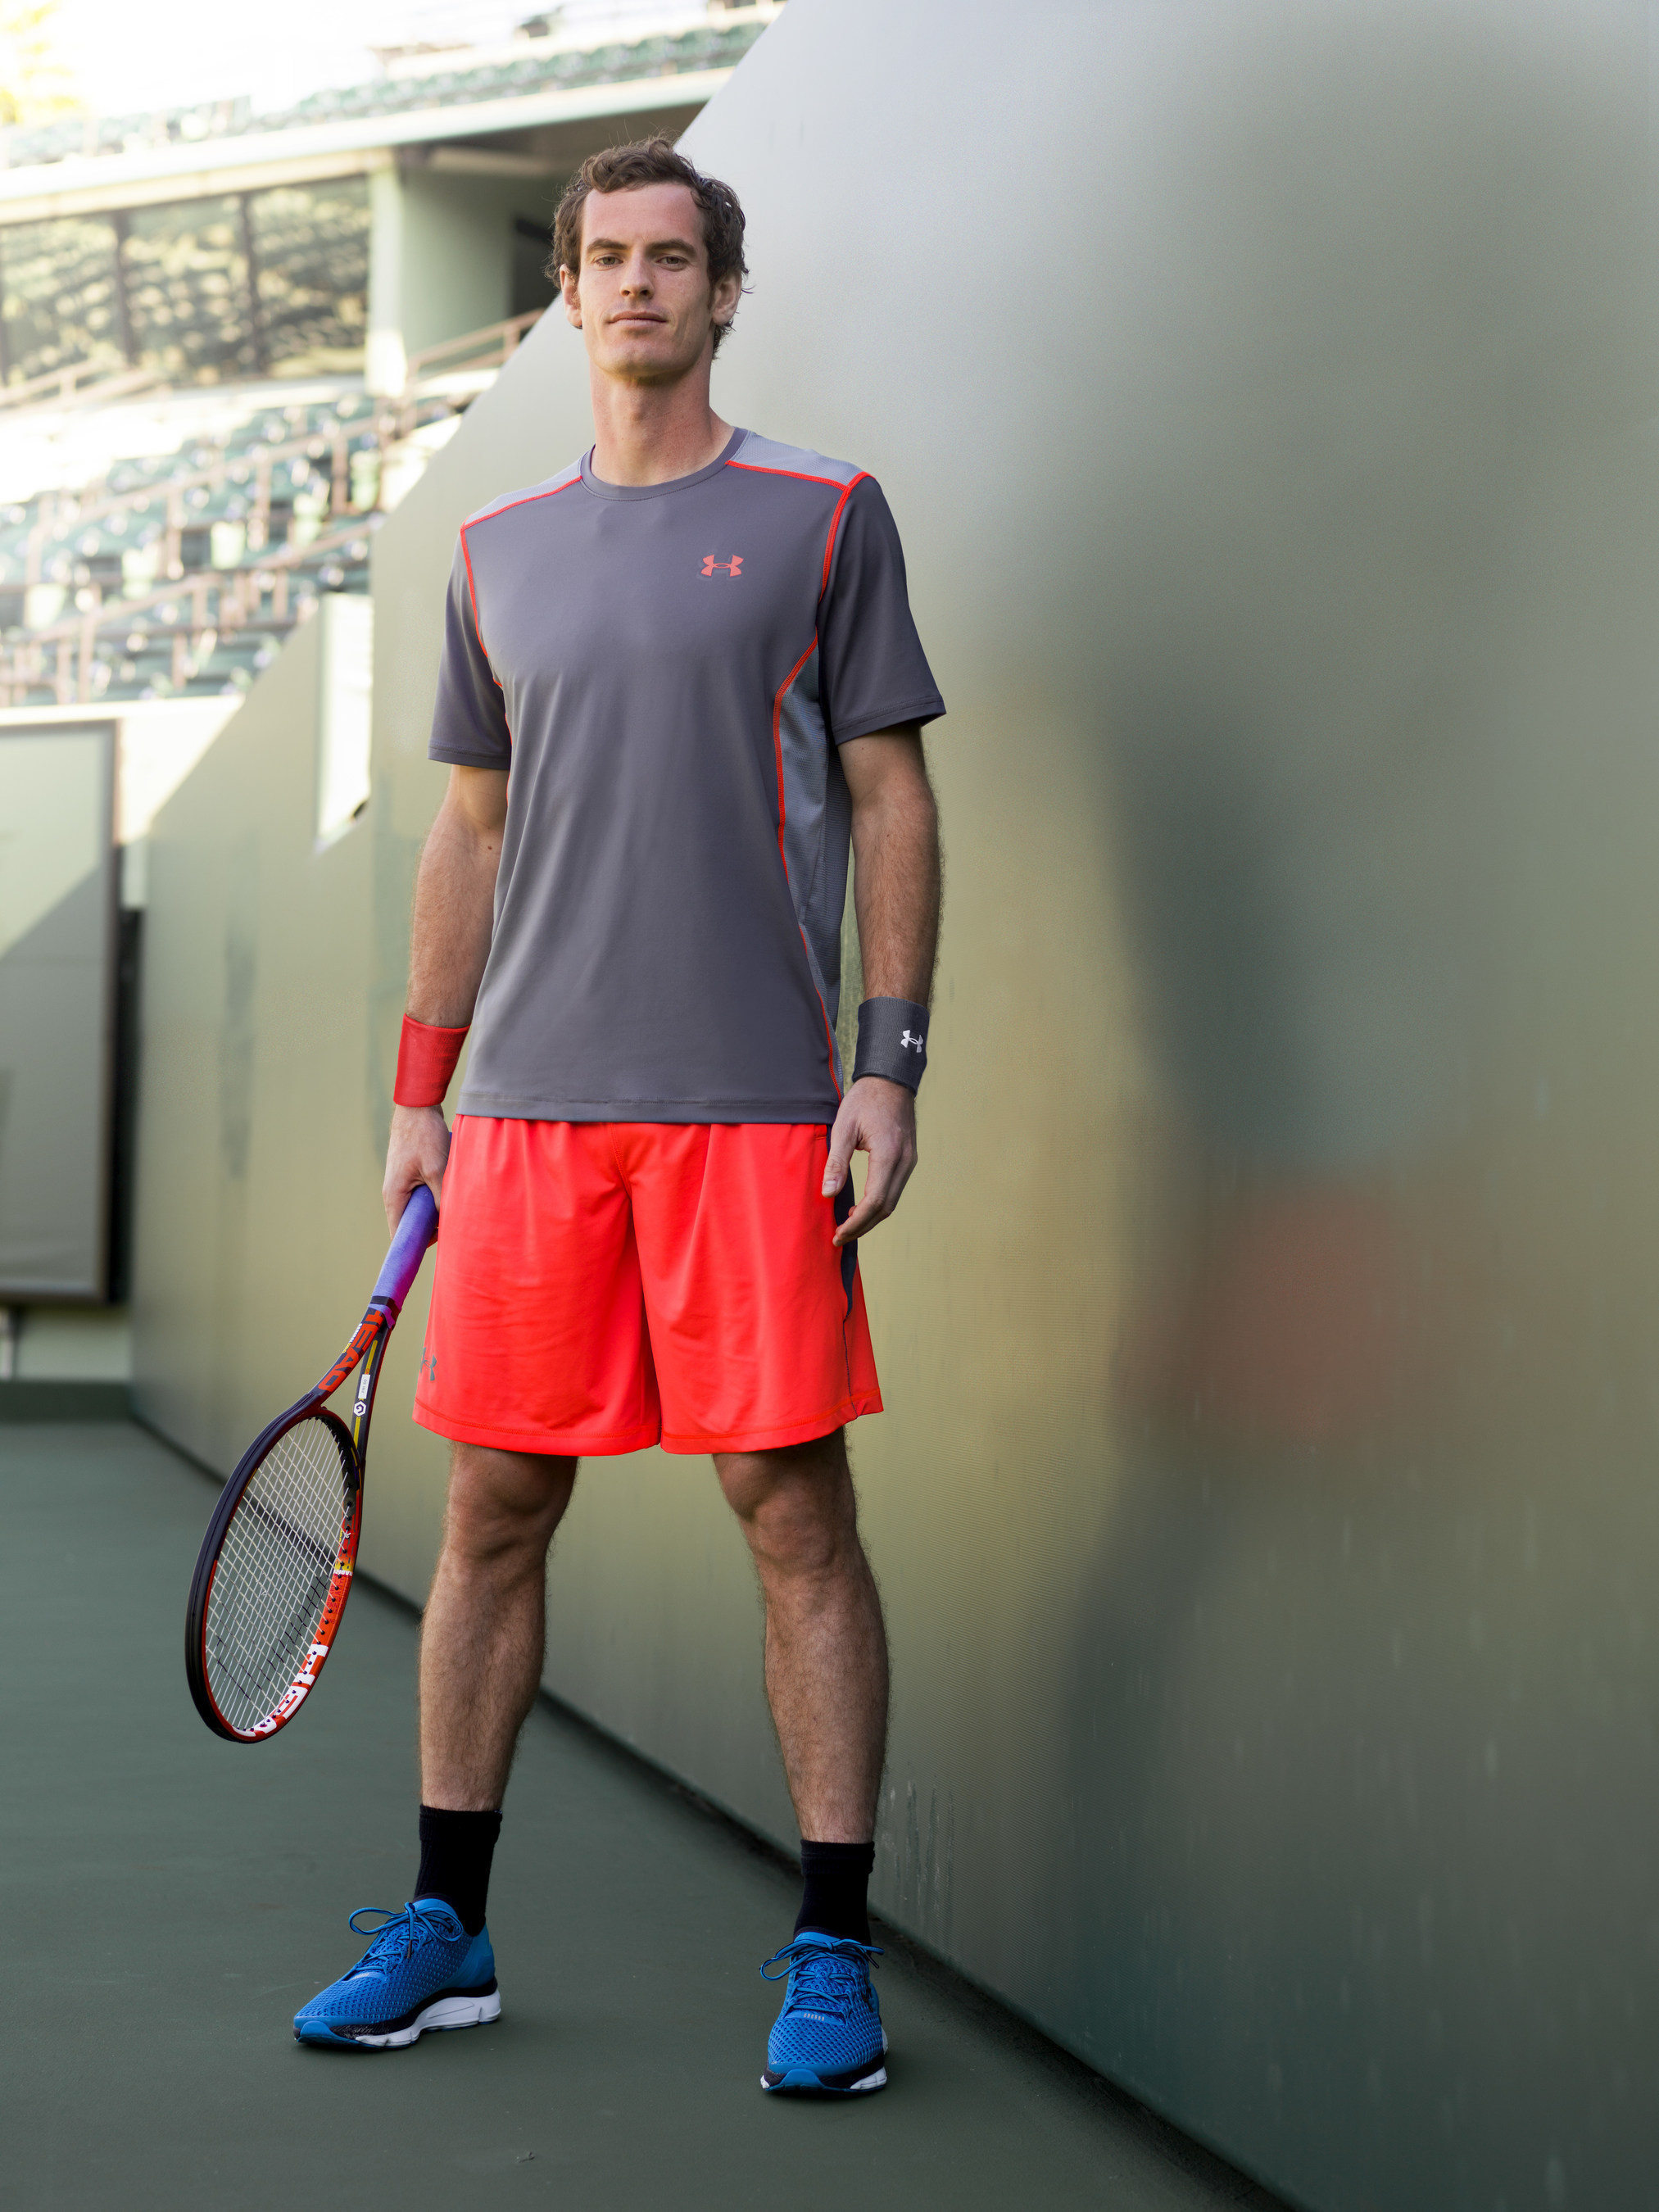 oogst Geurloos Kinderpaleis Under Armour Signs World Champion Professional Tennis Player Andy Murray